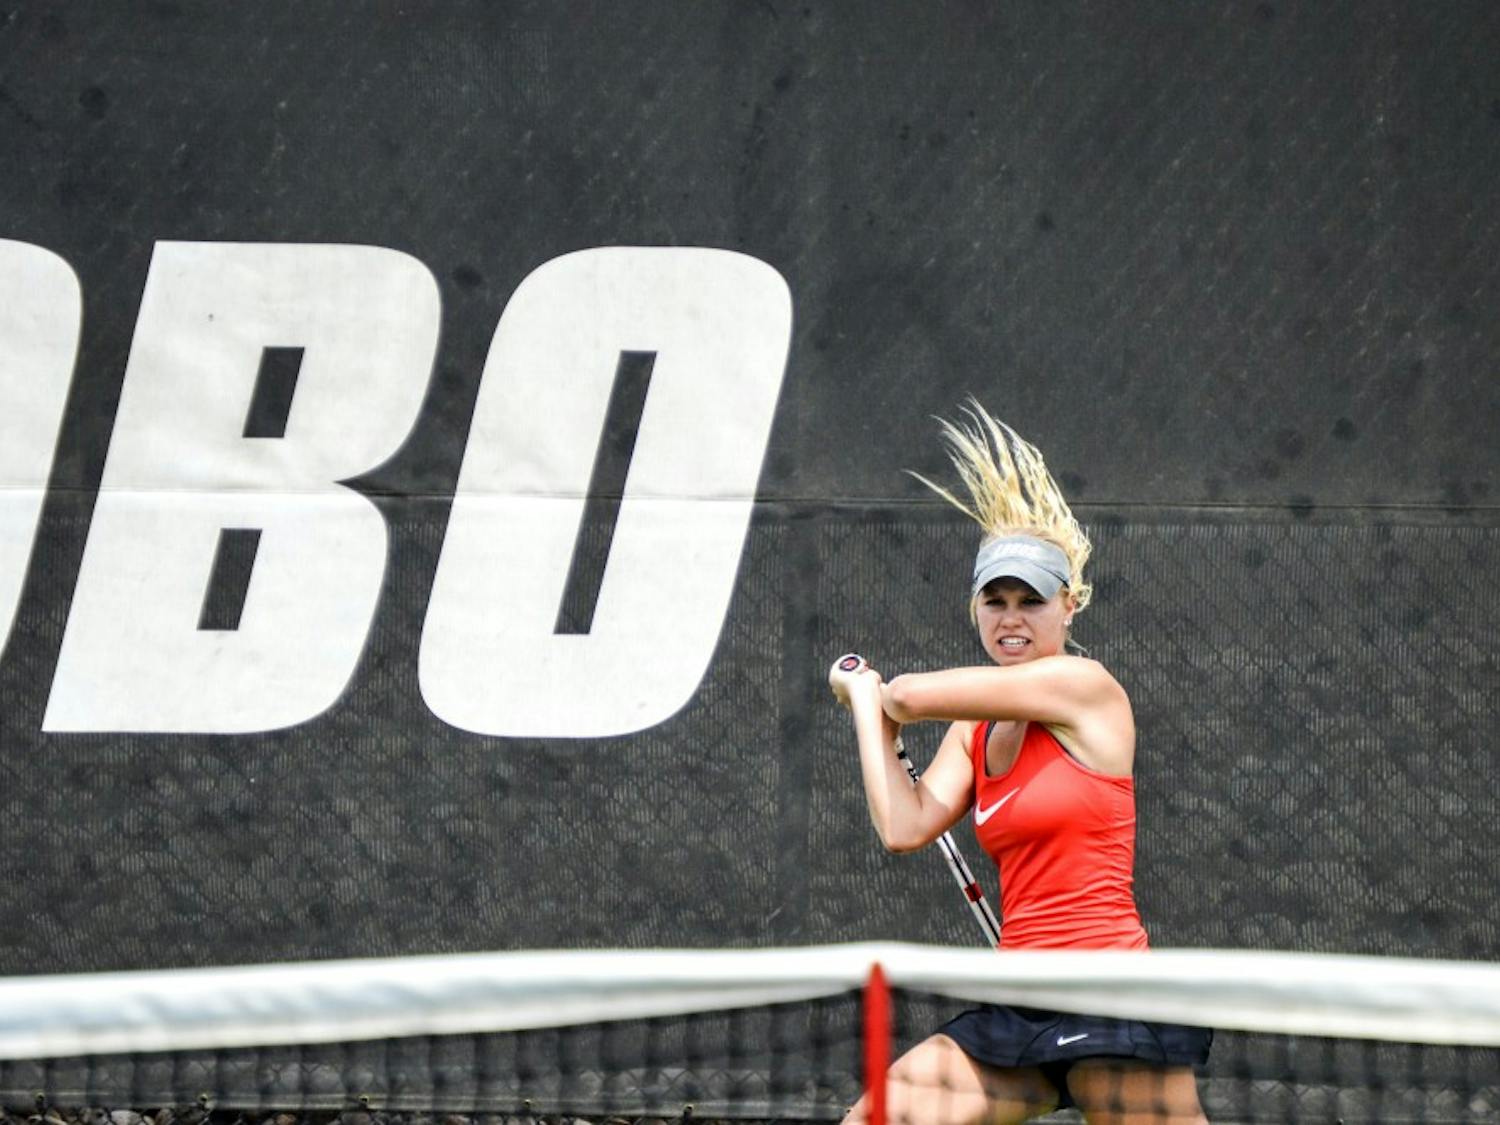 Junior Dominique Dulski swats the ball back to an Air Force player Saturday afternoon at the McKinnon Family tennis Stadium. The Lobos beat Air Force 6-1.